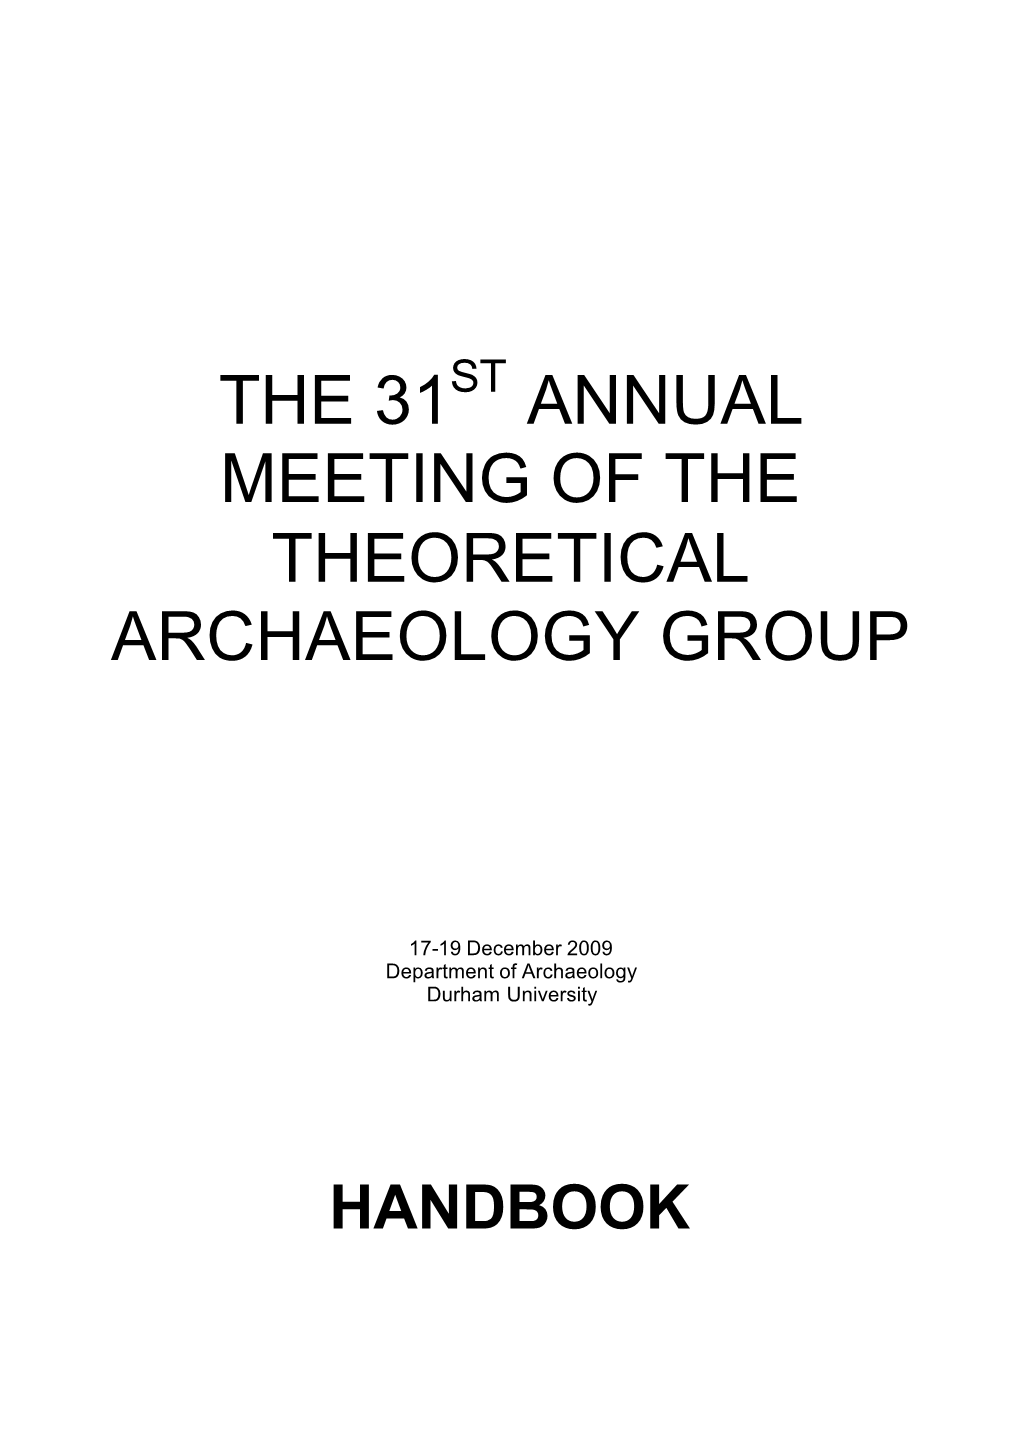 Annual Meeting of the Theoretical Archaeology Group